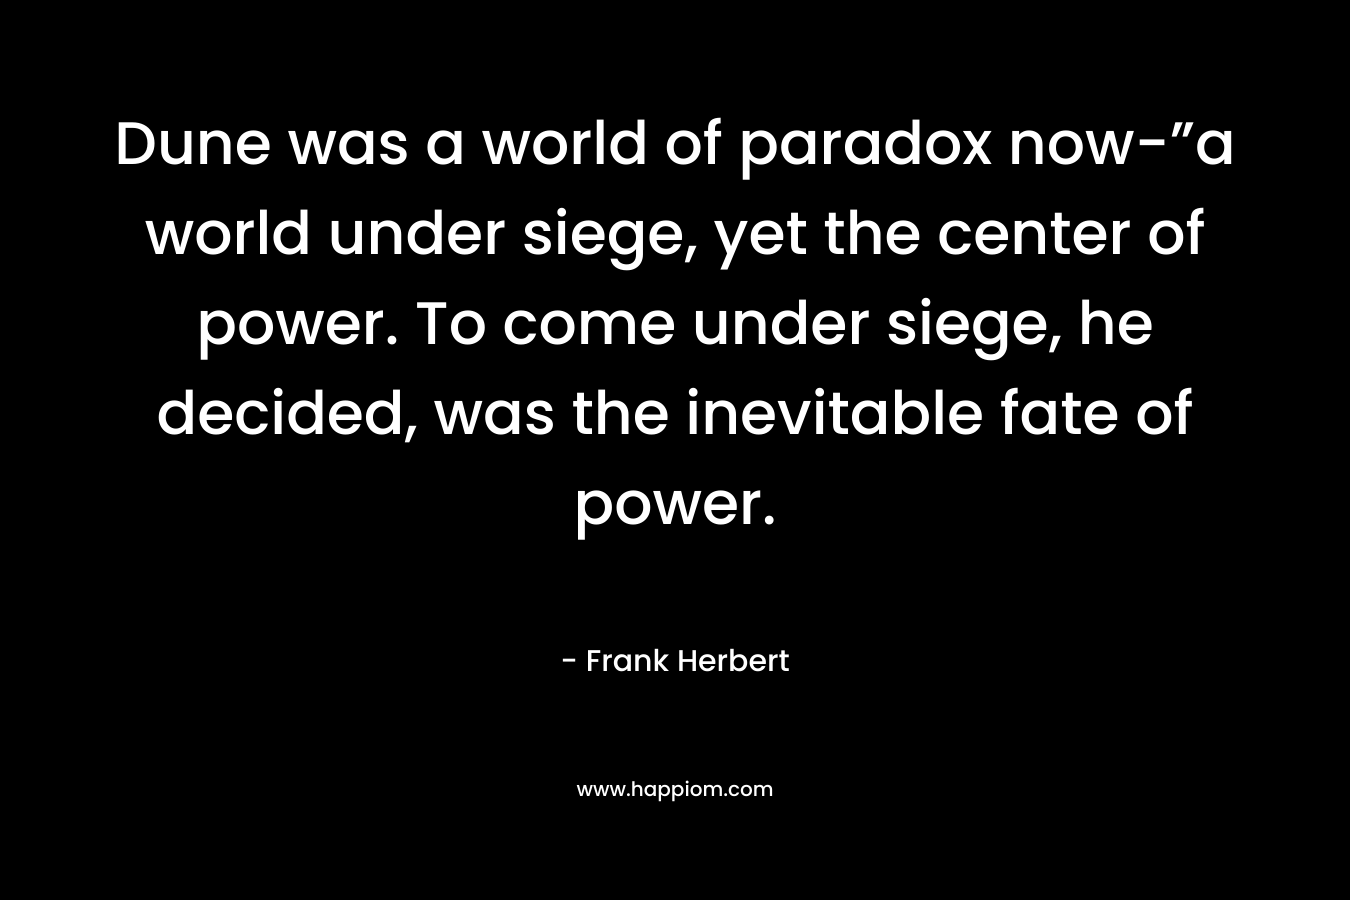 Dune was a world of paradox now-”a world under siege, yet the center of power. To come under siege, he decided, was the inevitable fate of power.